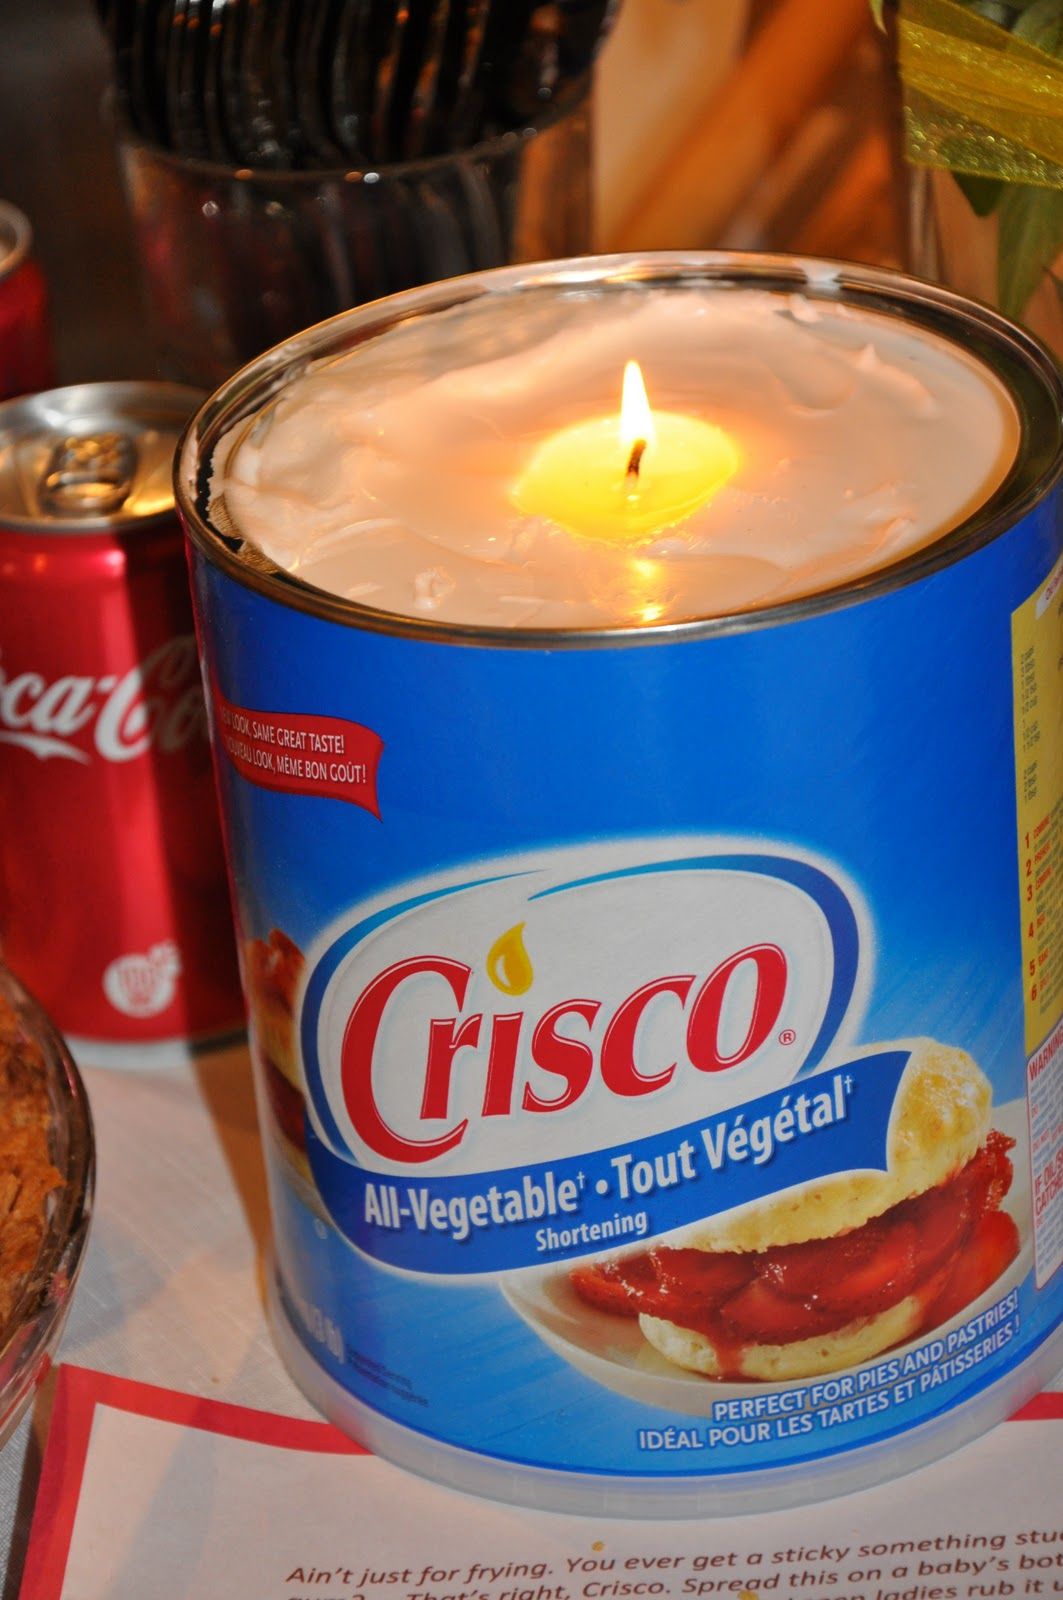 Crisco Candle for emergency situations. Simply put a piece of string in a tub of